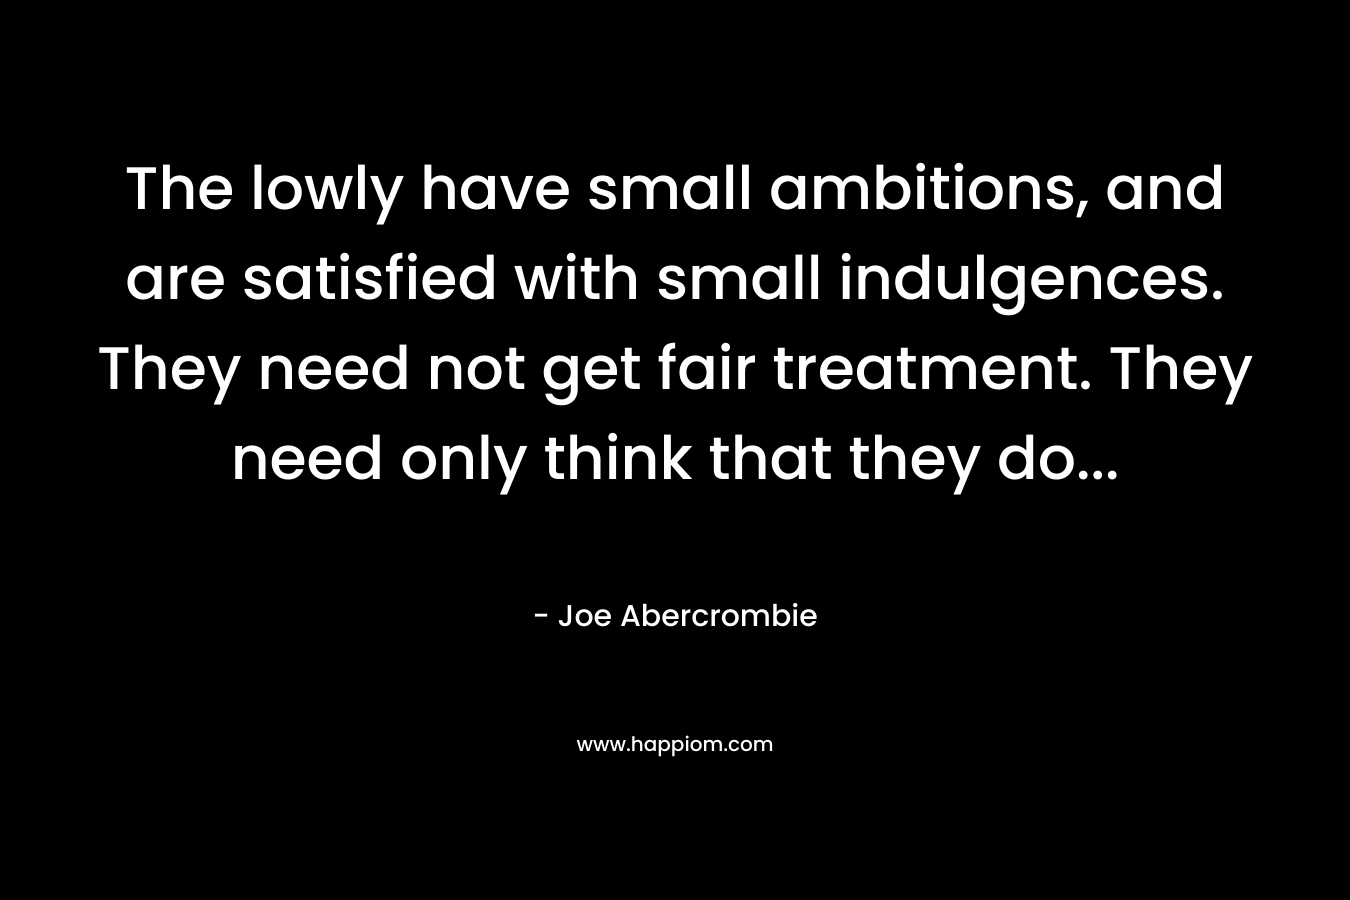 The lowly have small ambitions, and are satisfied with small indulgences. They need not get fair treatment. They need only think that they do... 